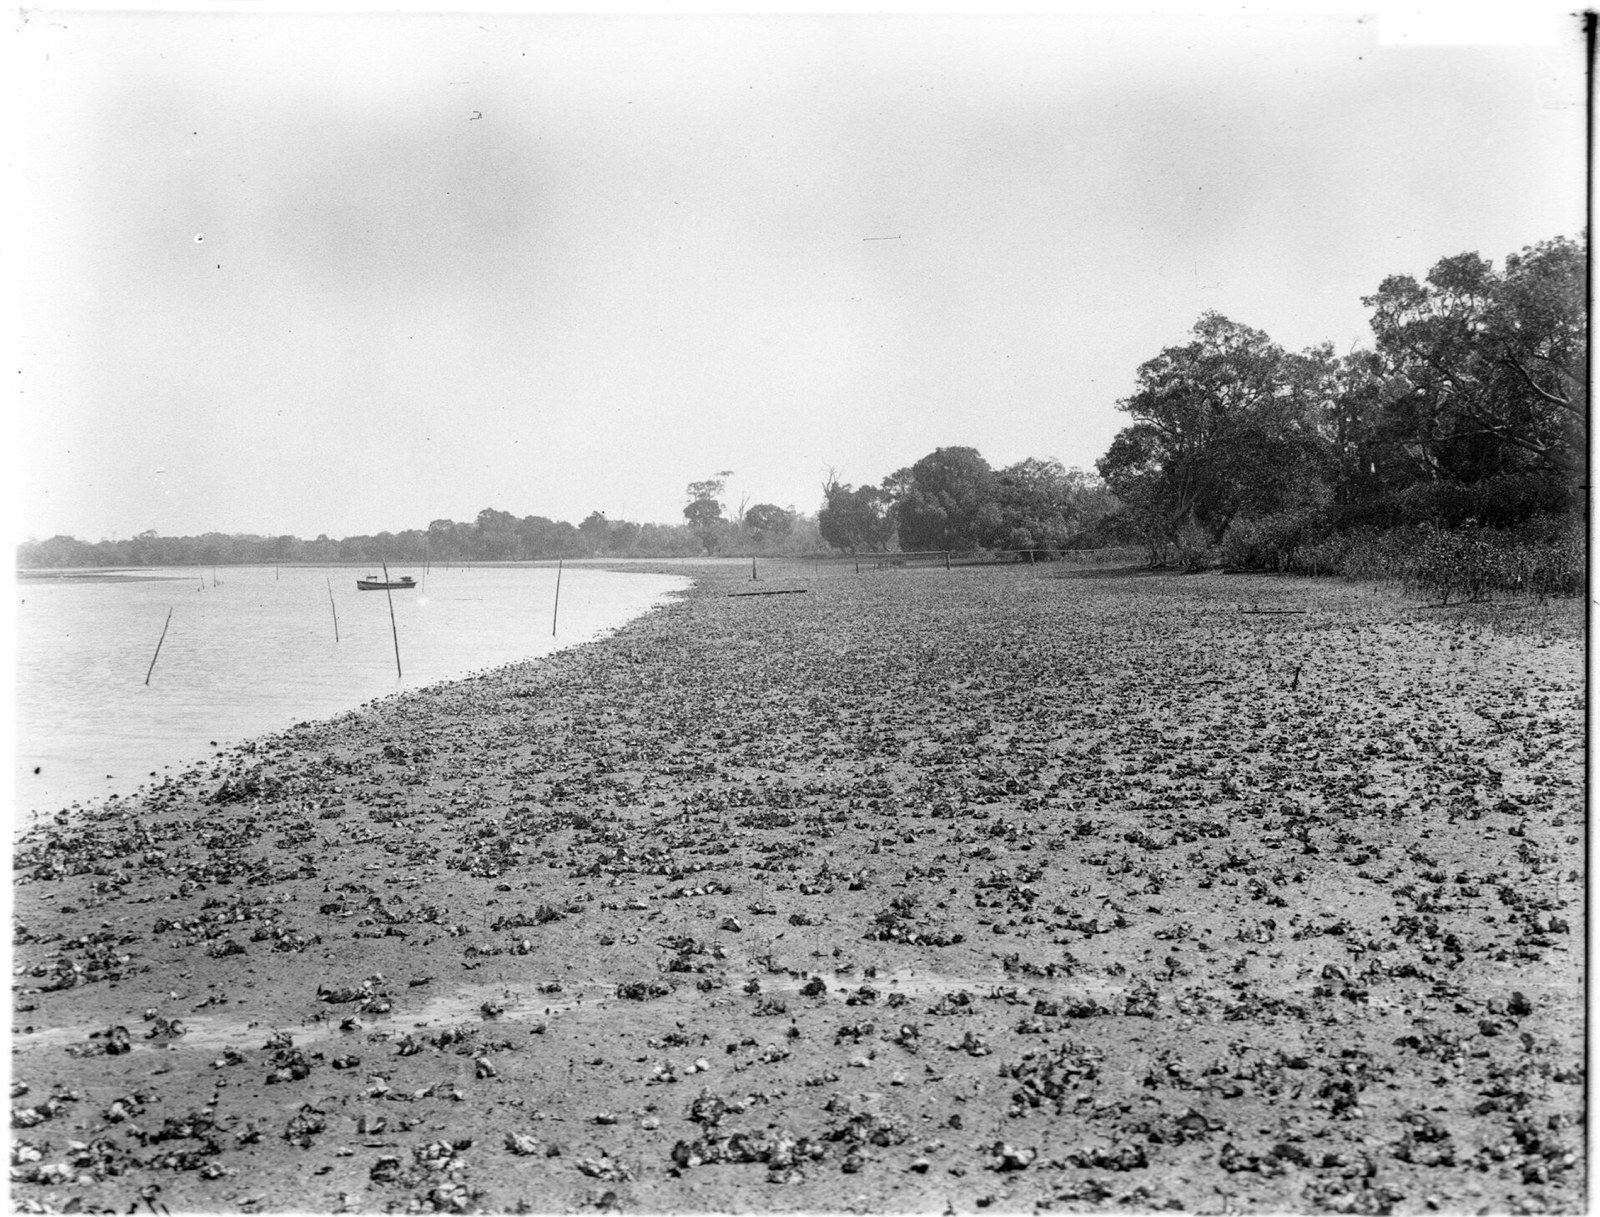 Government Printing Office 1 - 02086 - Oyster bed [From NSW Government Printer series: Ballina], 1926